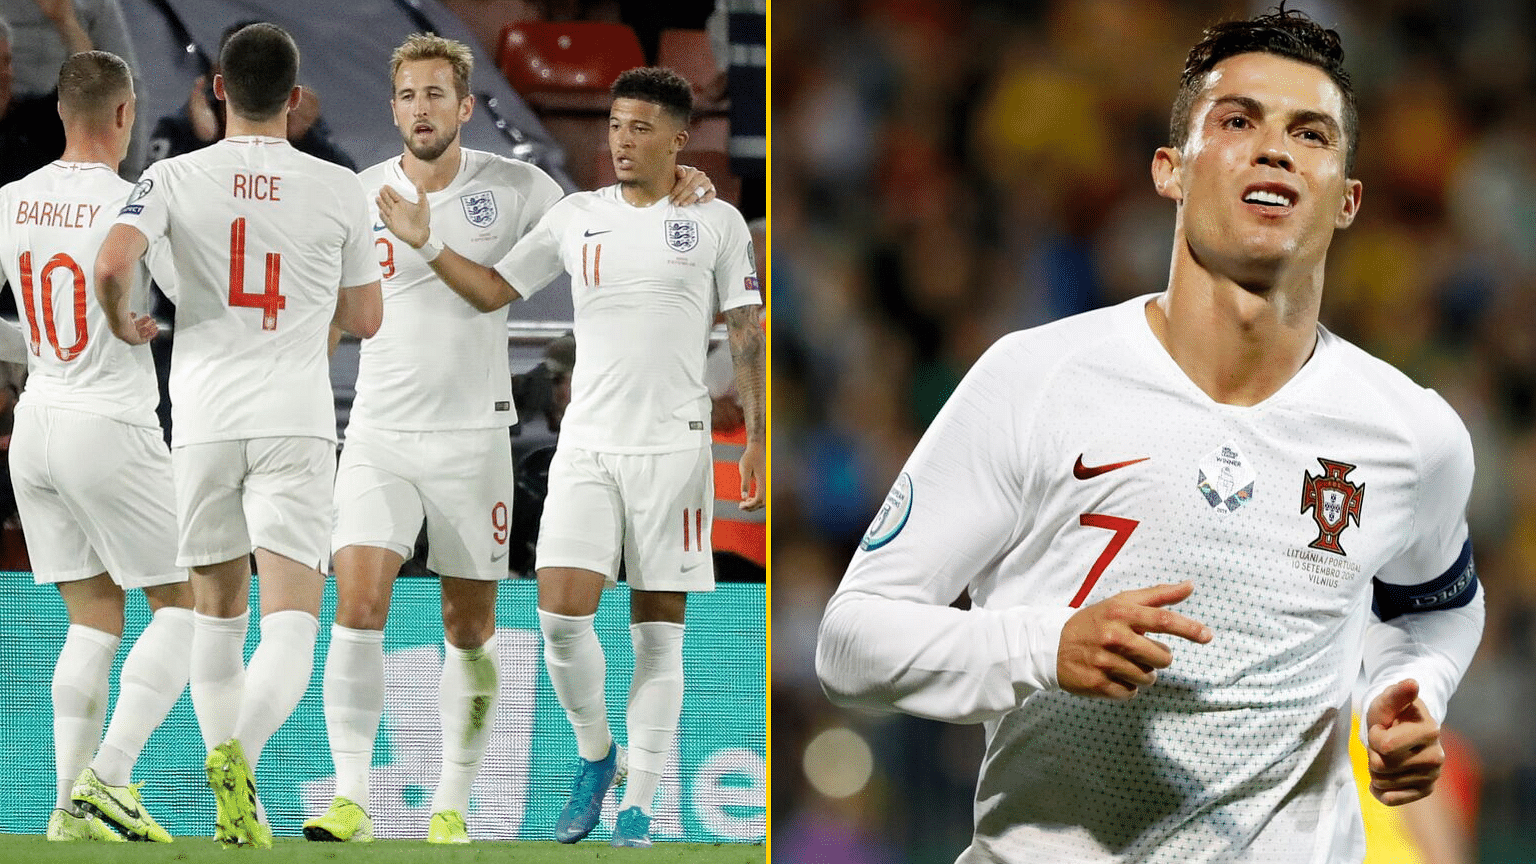 England made it four wins out of four in Group A with a 5-3 win over Kosovo while Ronaldo netted four goals vs Lithuania.